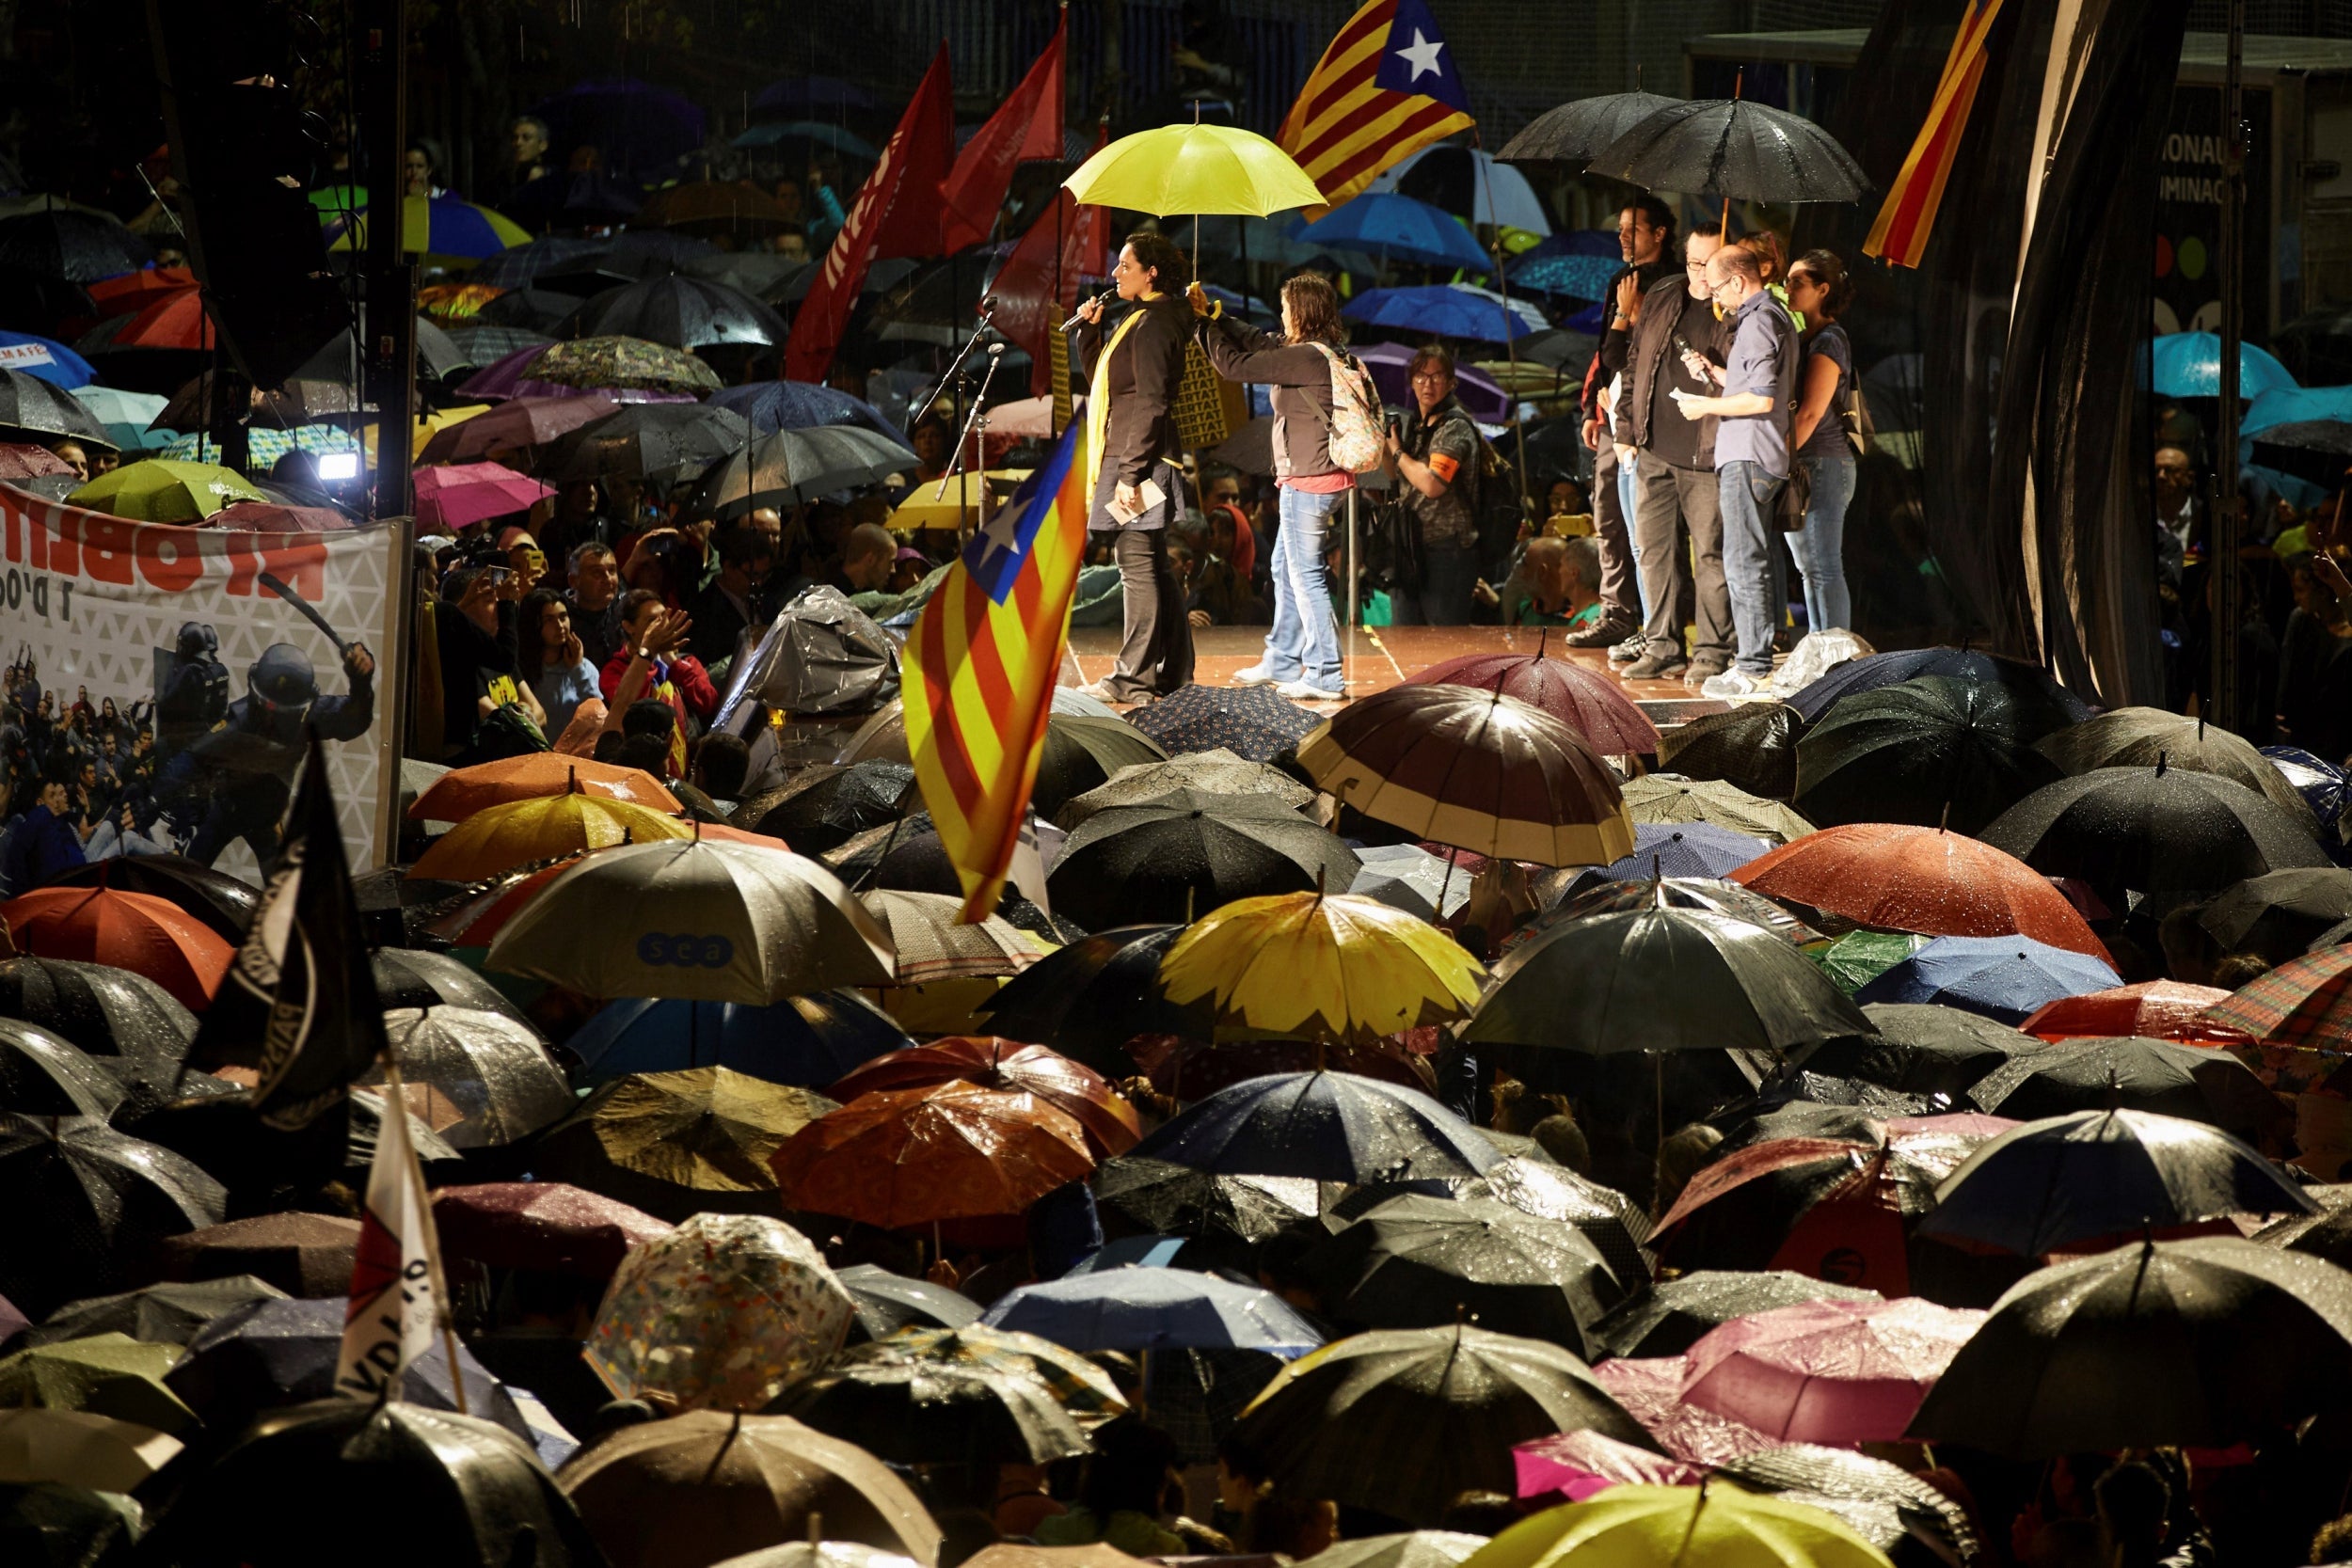 People attend a protest in Girona against the sentencing of independence leaders